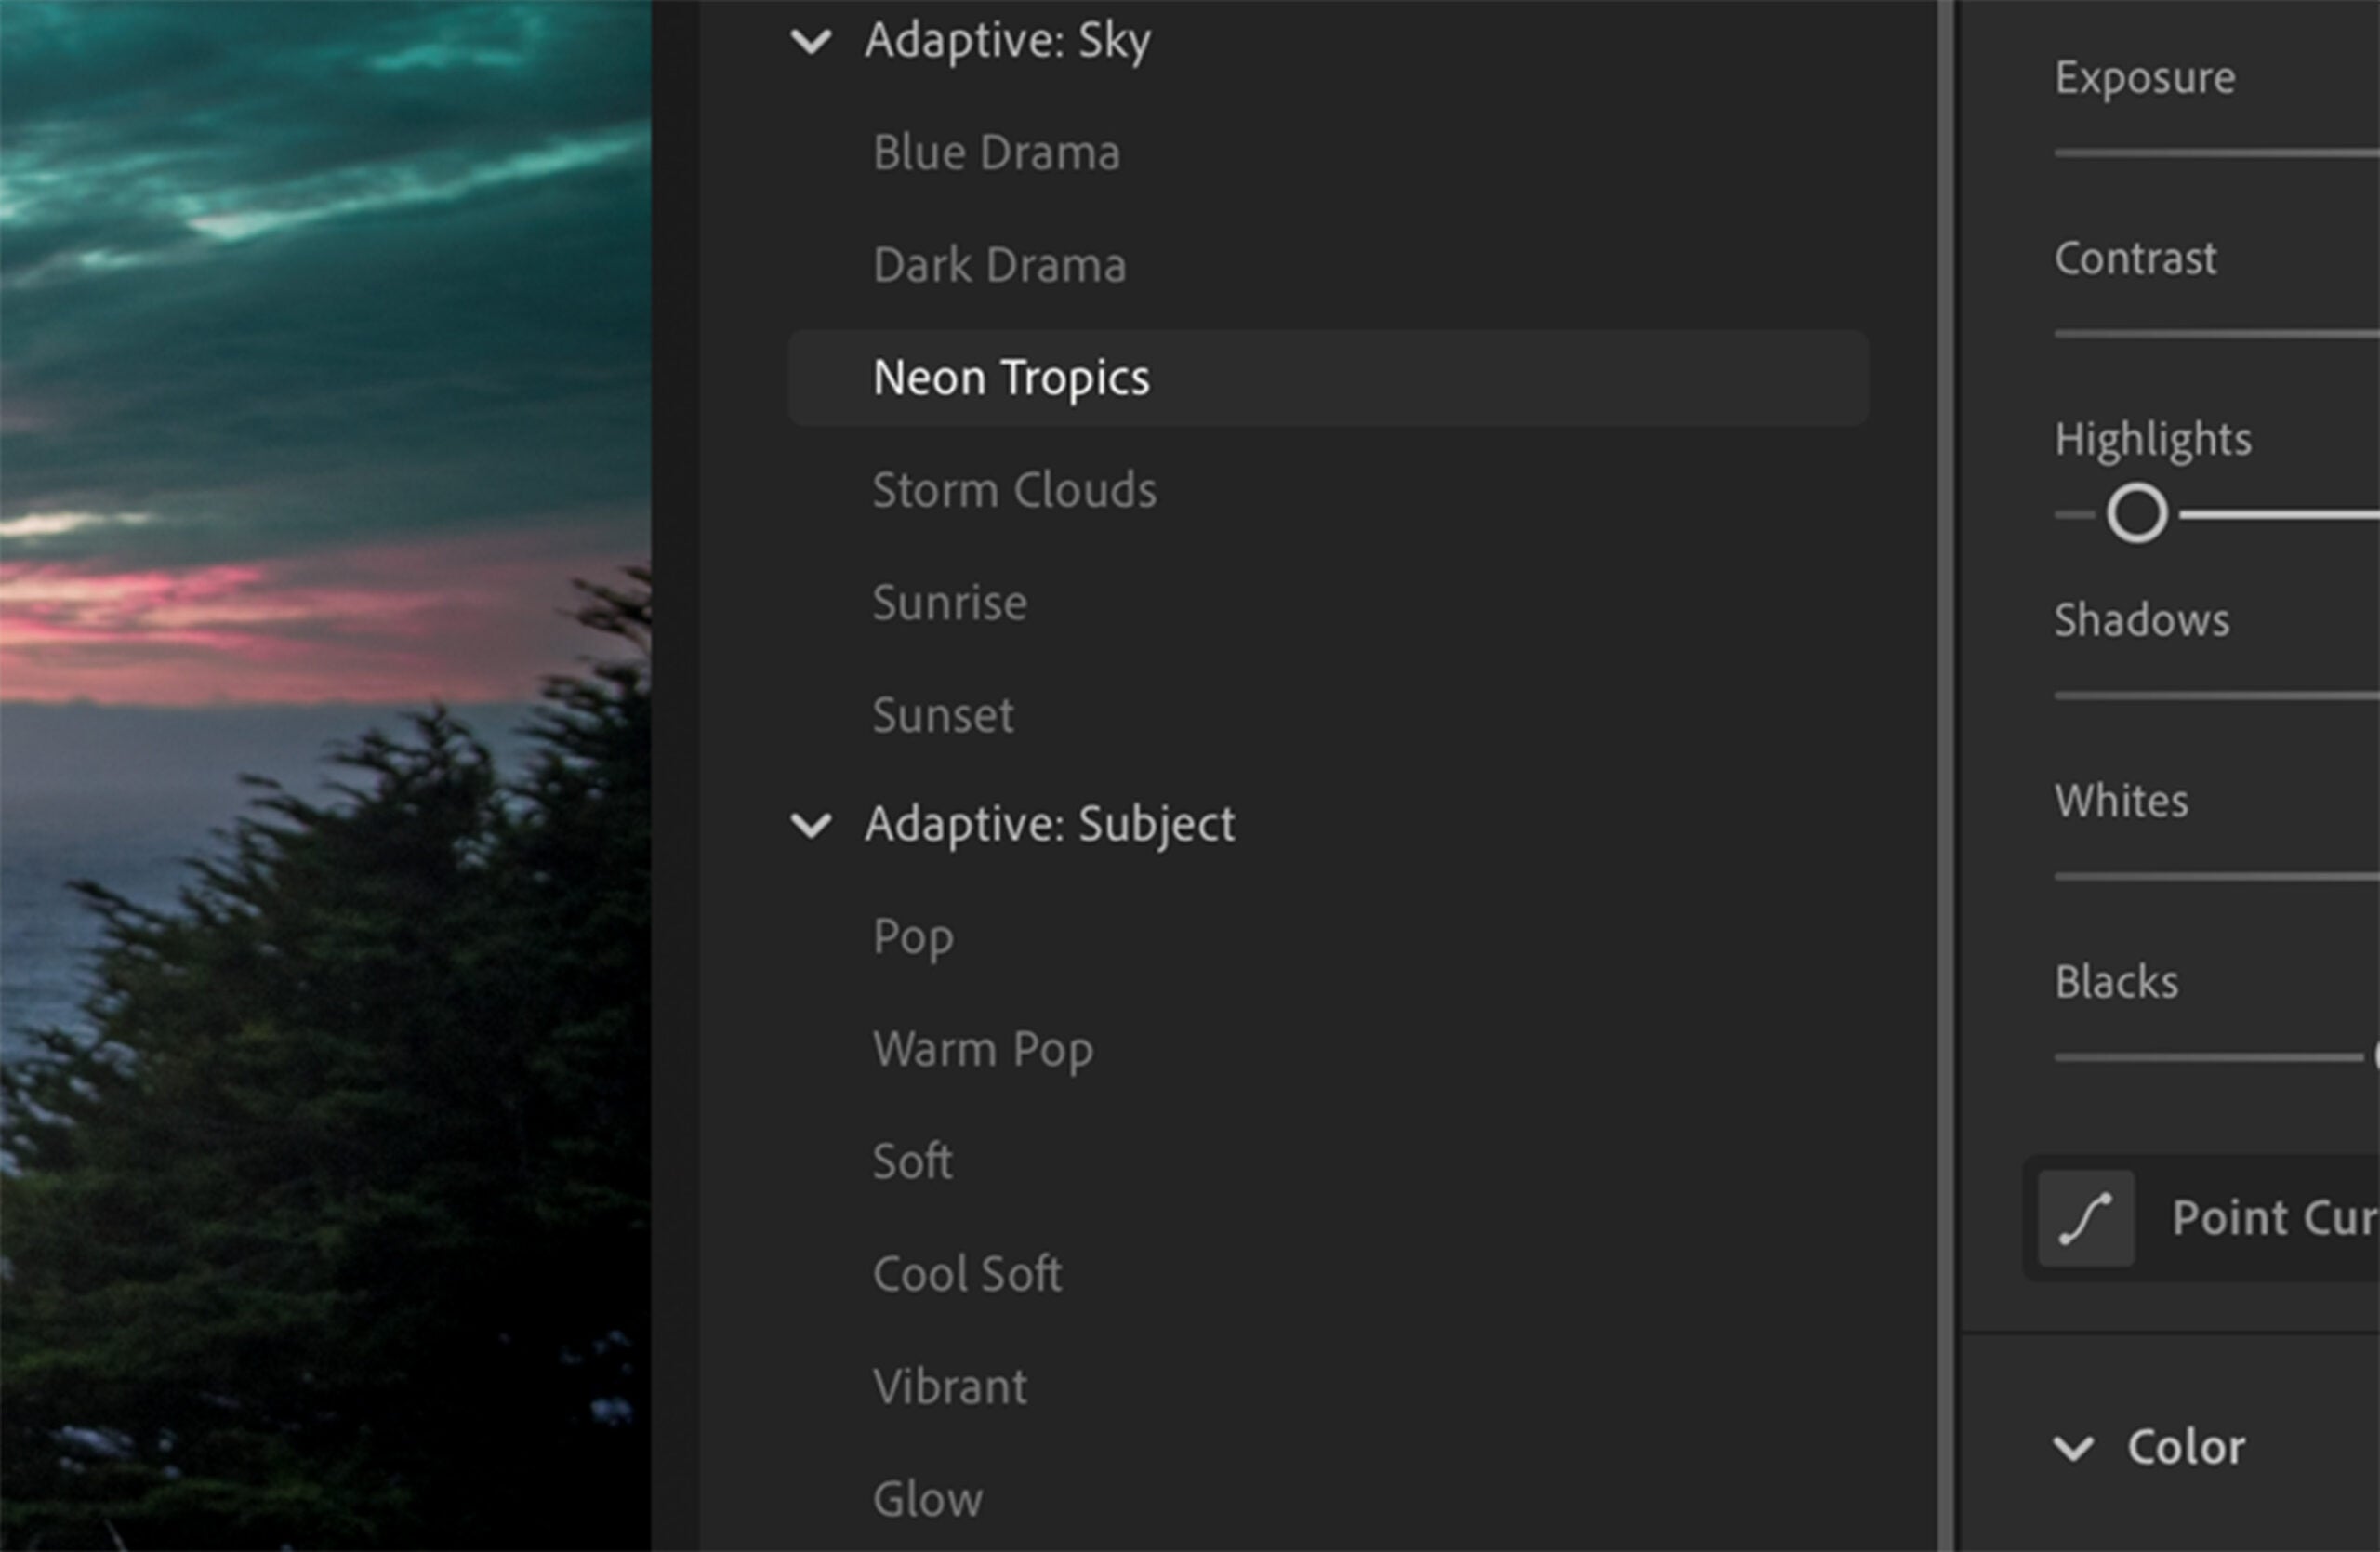 Adaptive filters in Lightroom